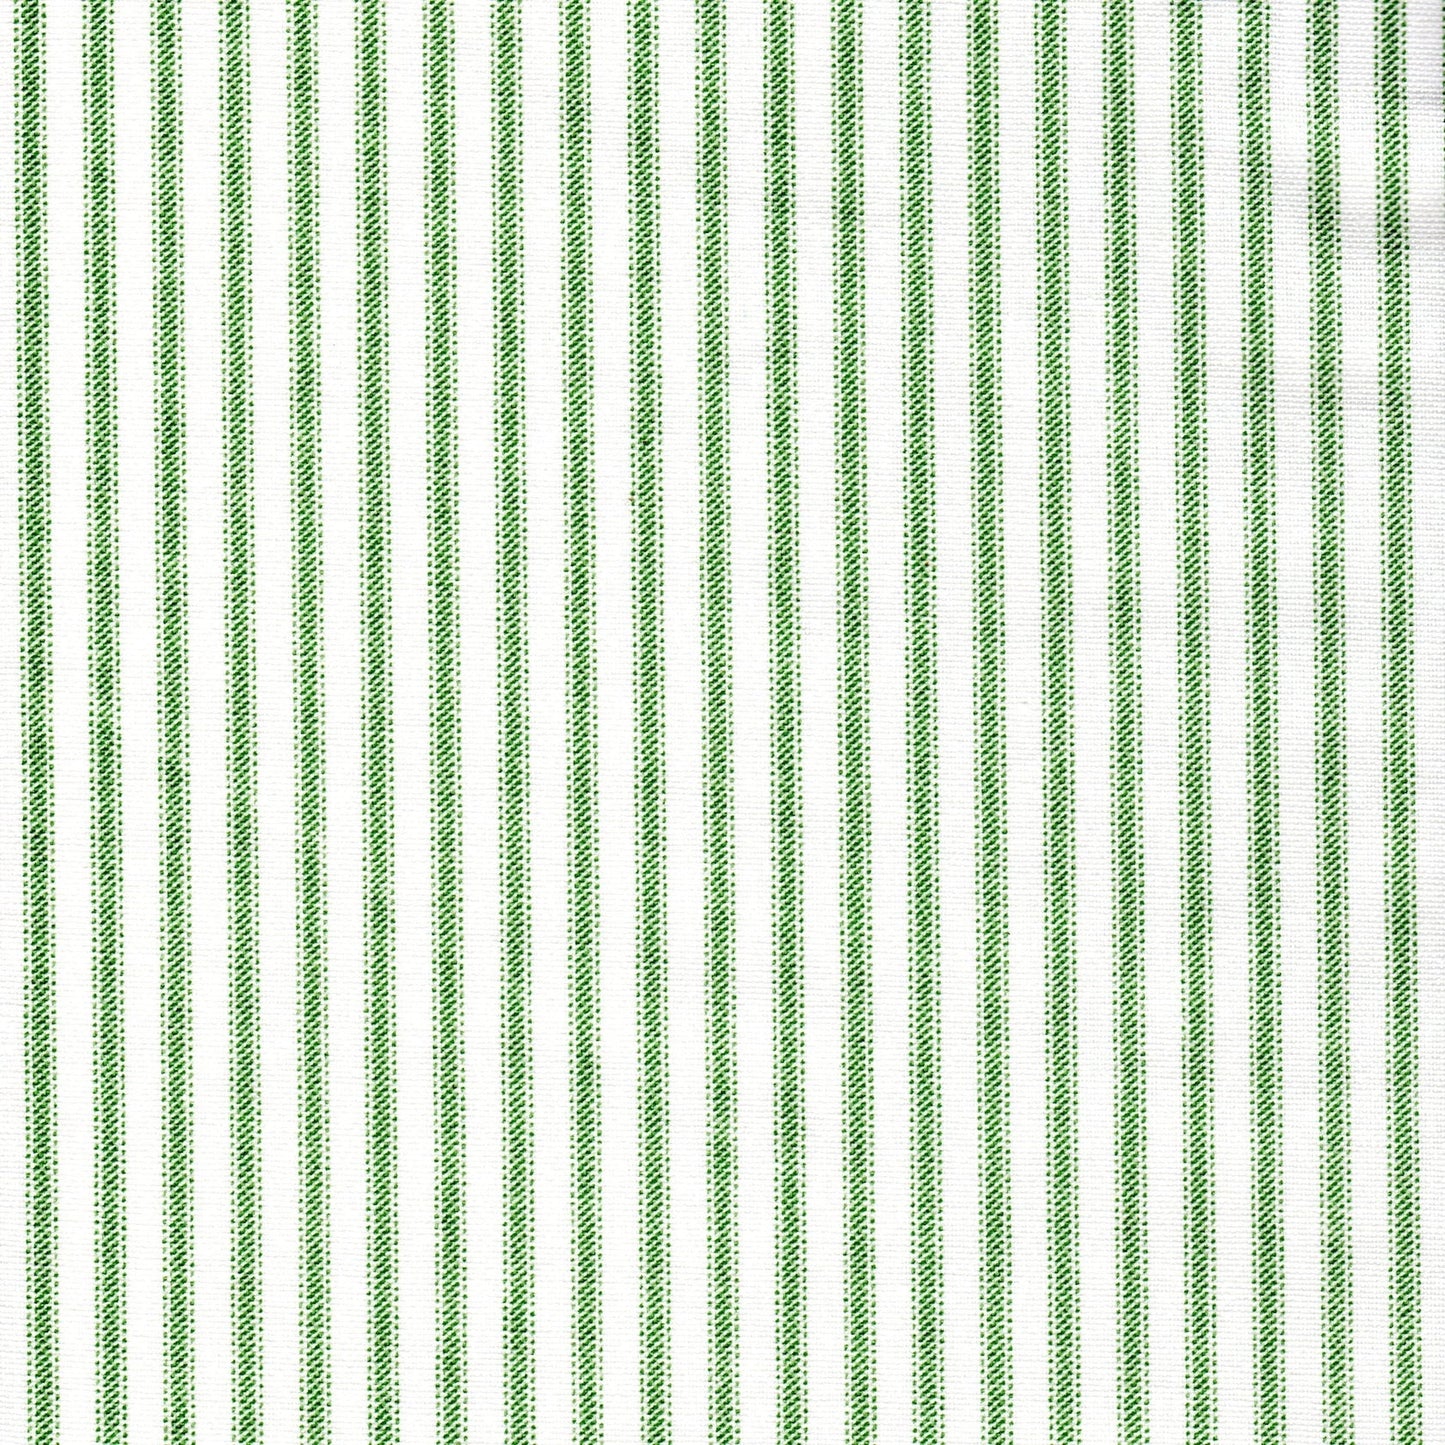 decorative pillows in Classic Pine Green Ticking Stripe on White